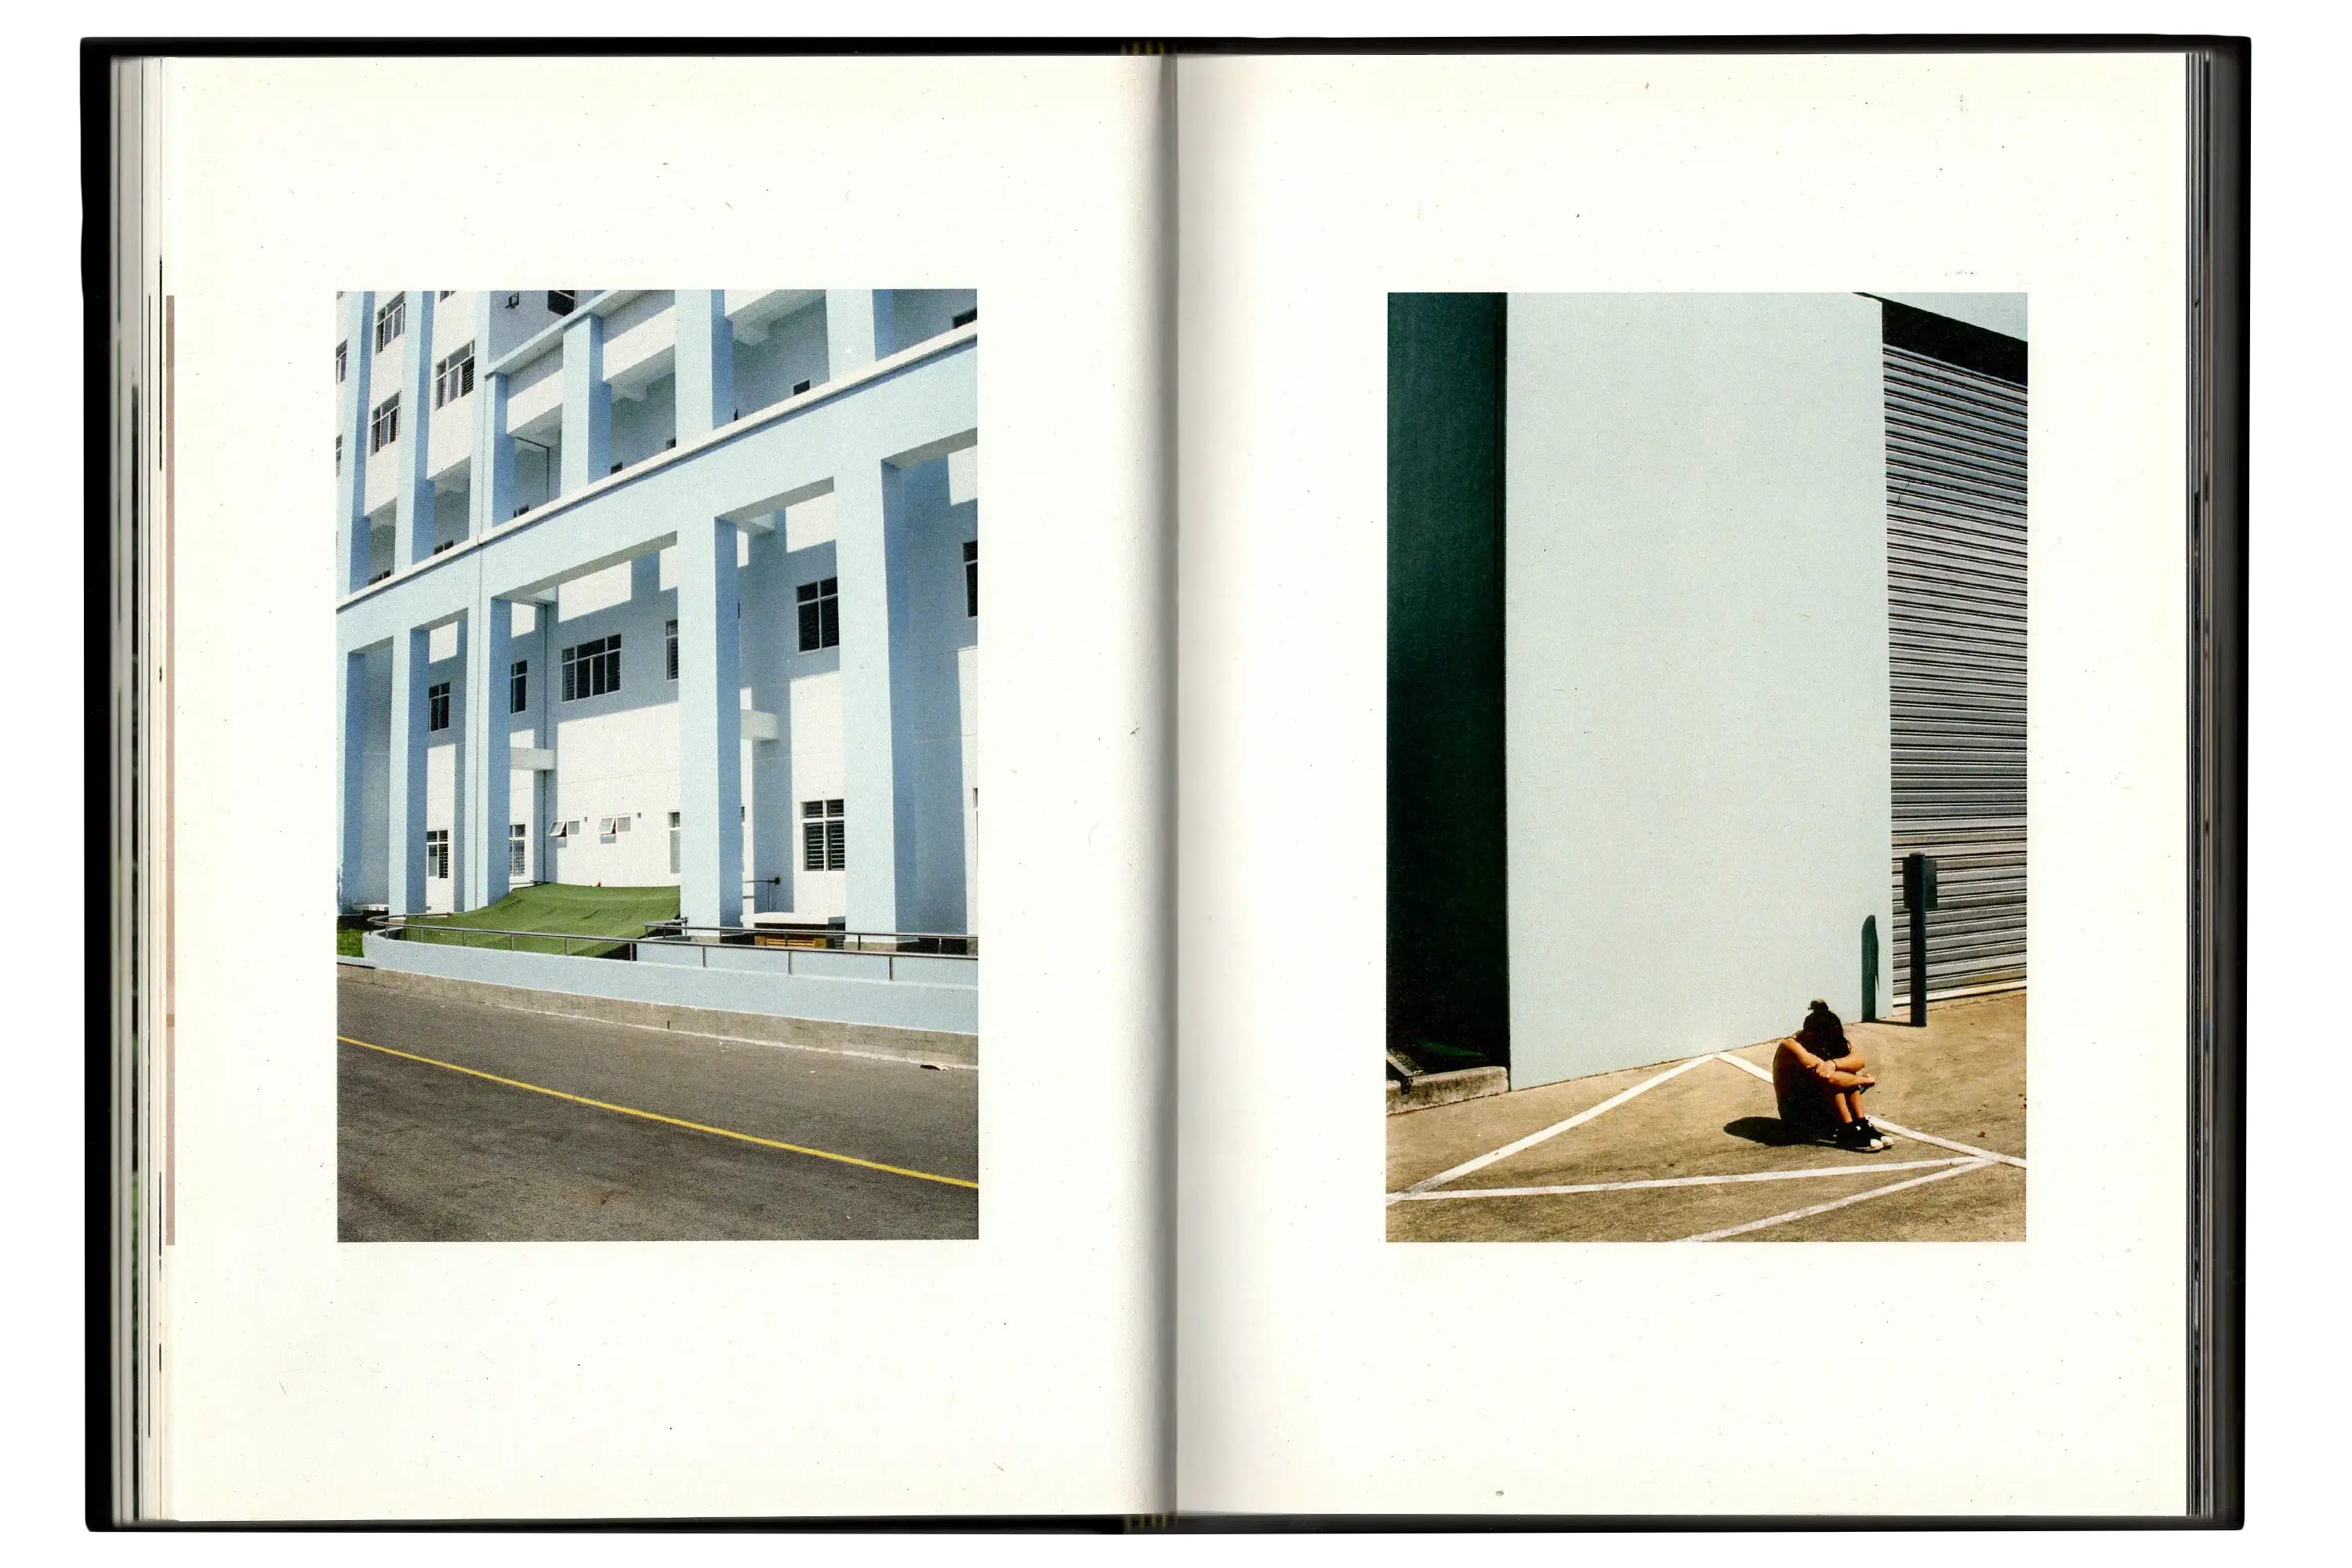 Imperfect Photo Book - left page image shows large blue building, right page image shows woman sitting with head down and arms crossed on floor in front of blue building